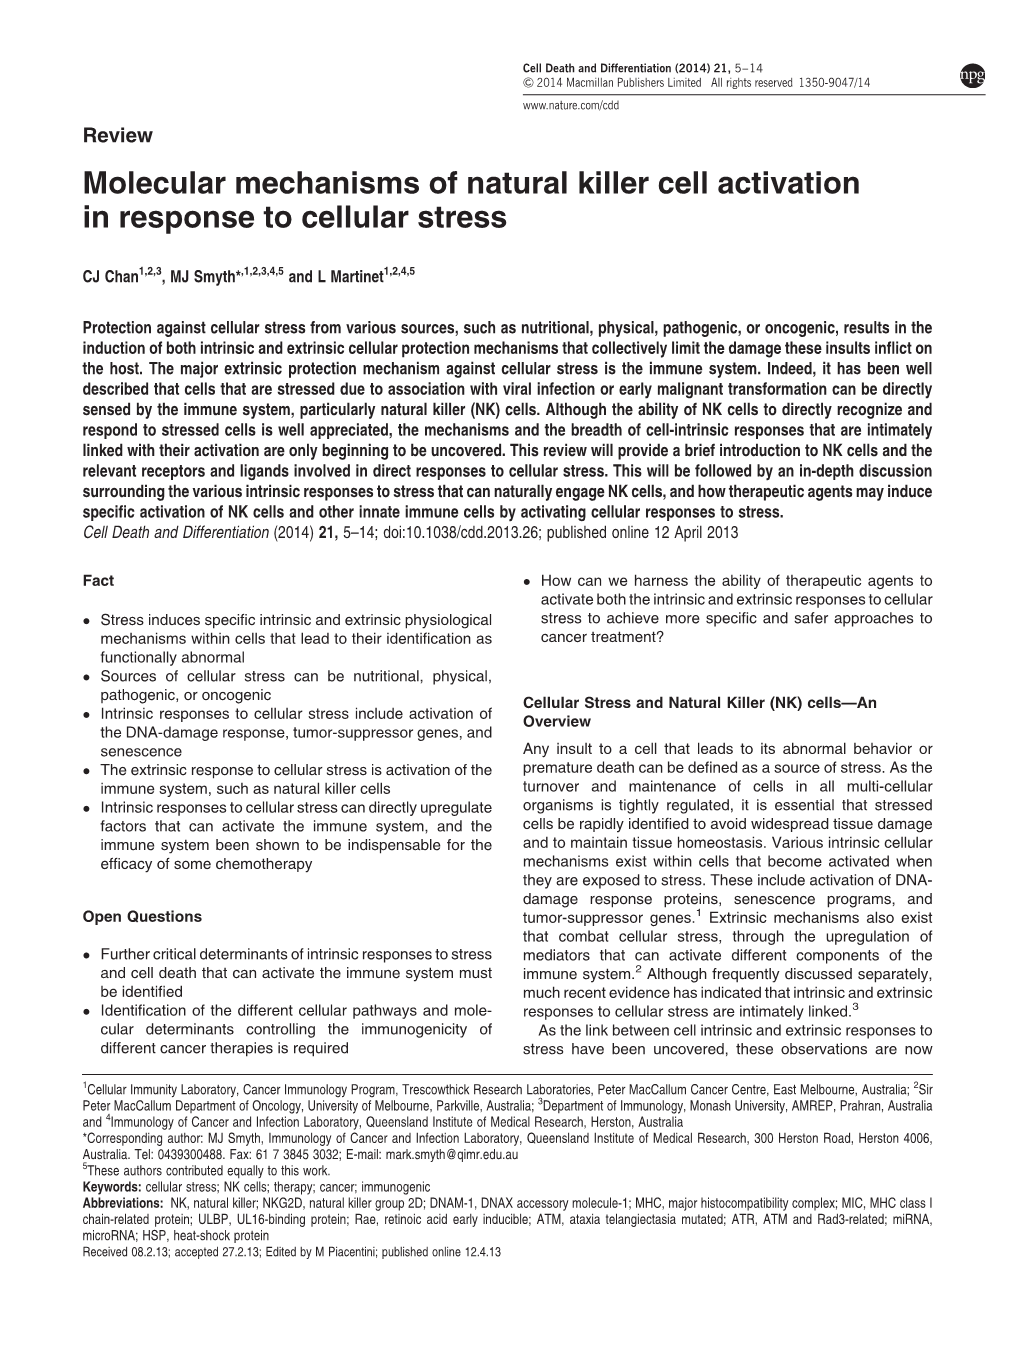 Molecular Mechanisms of Natural Killer Cell Activation in Response to Cellular Stress